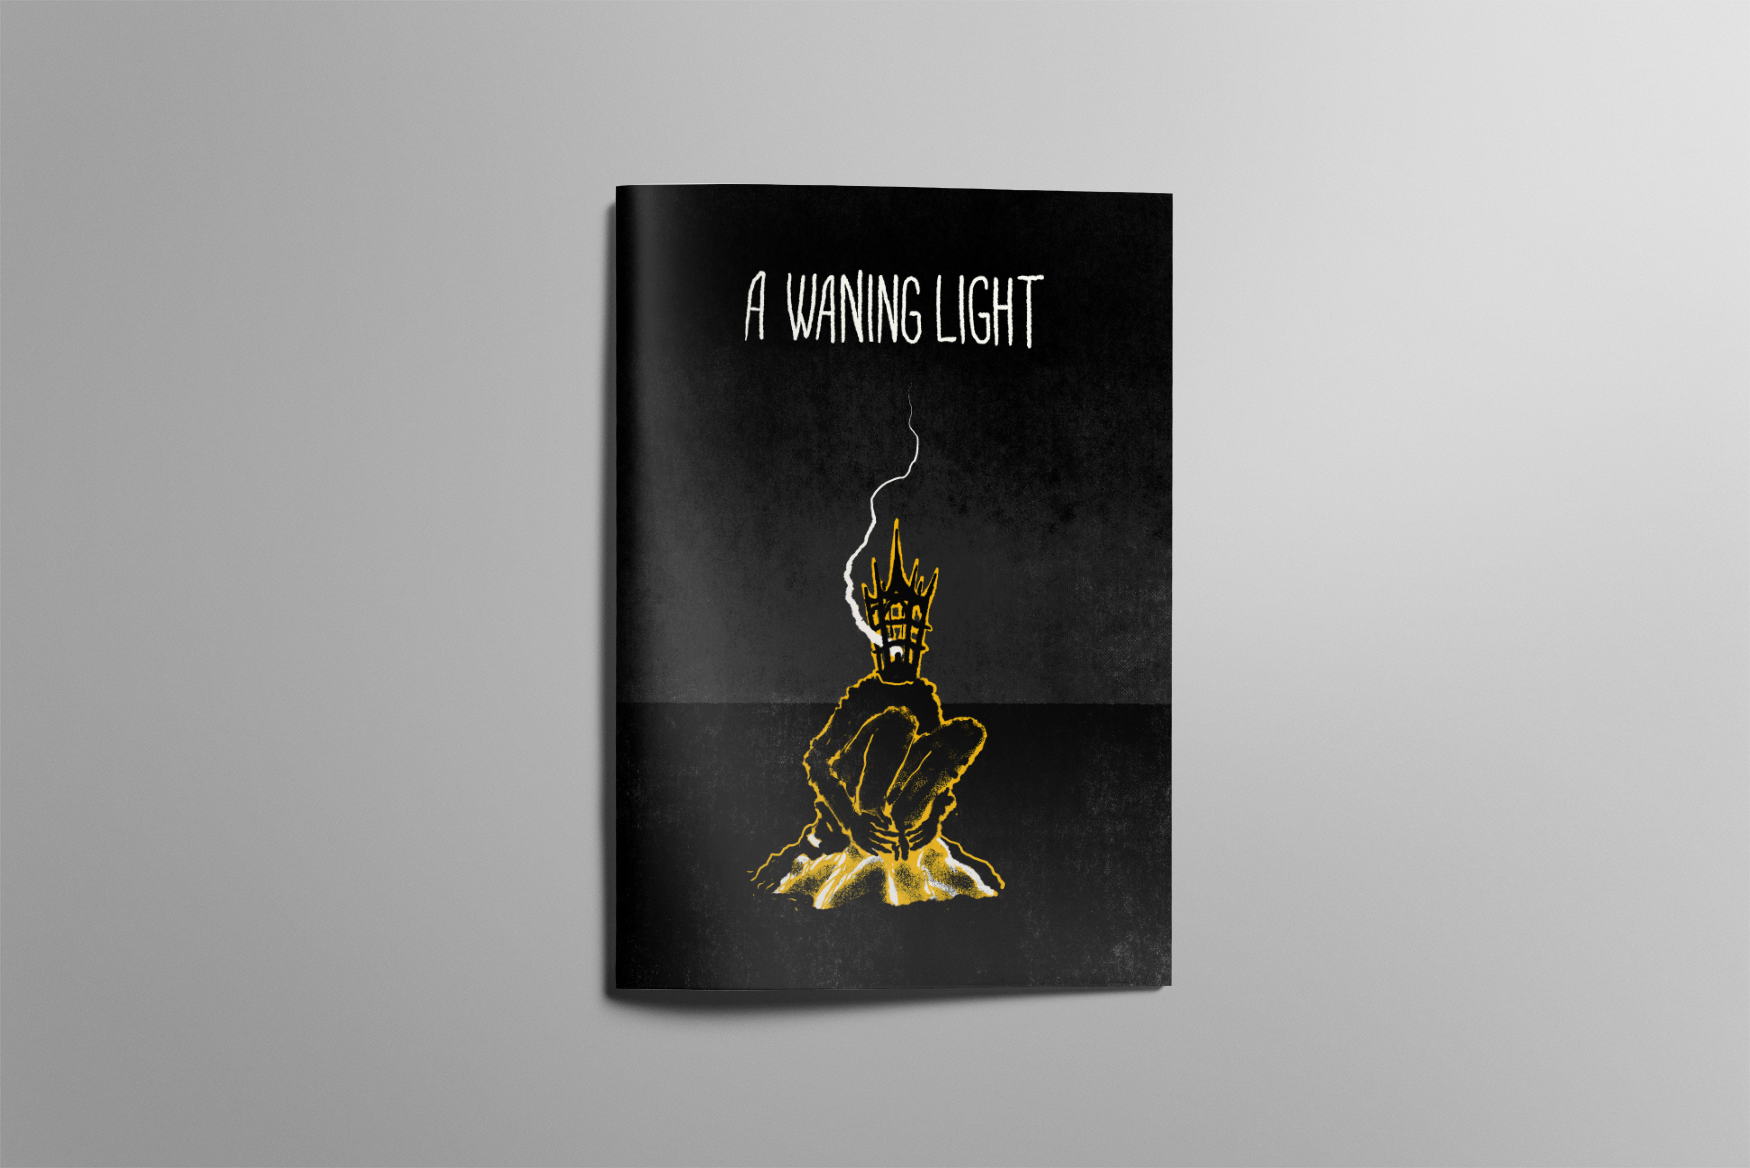 A mockup of an A5 zine. The cover is black and has a simple illustration of a crouched figure with a cage for a head. They sit atop a burned out campfire, and smoke rises from within the cage. The title reads "A Waning Light".